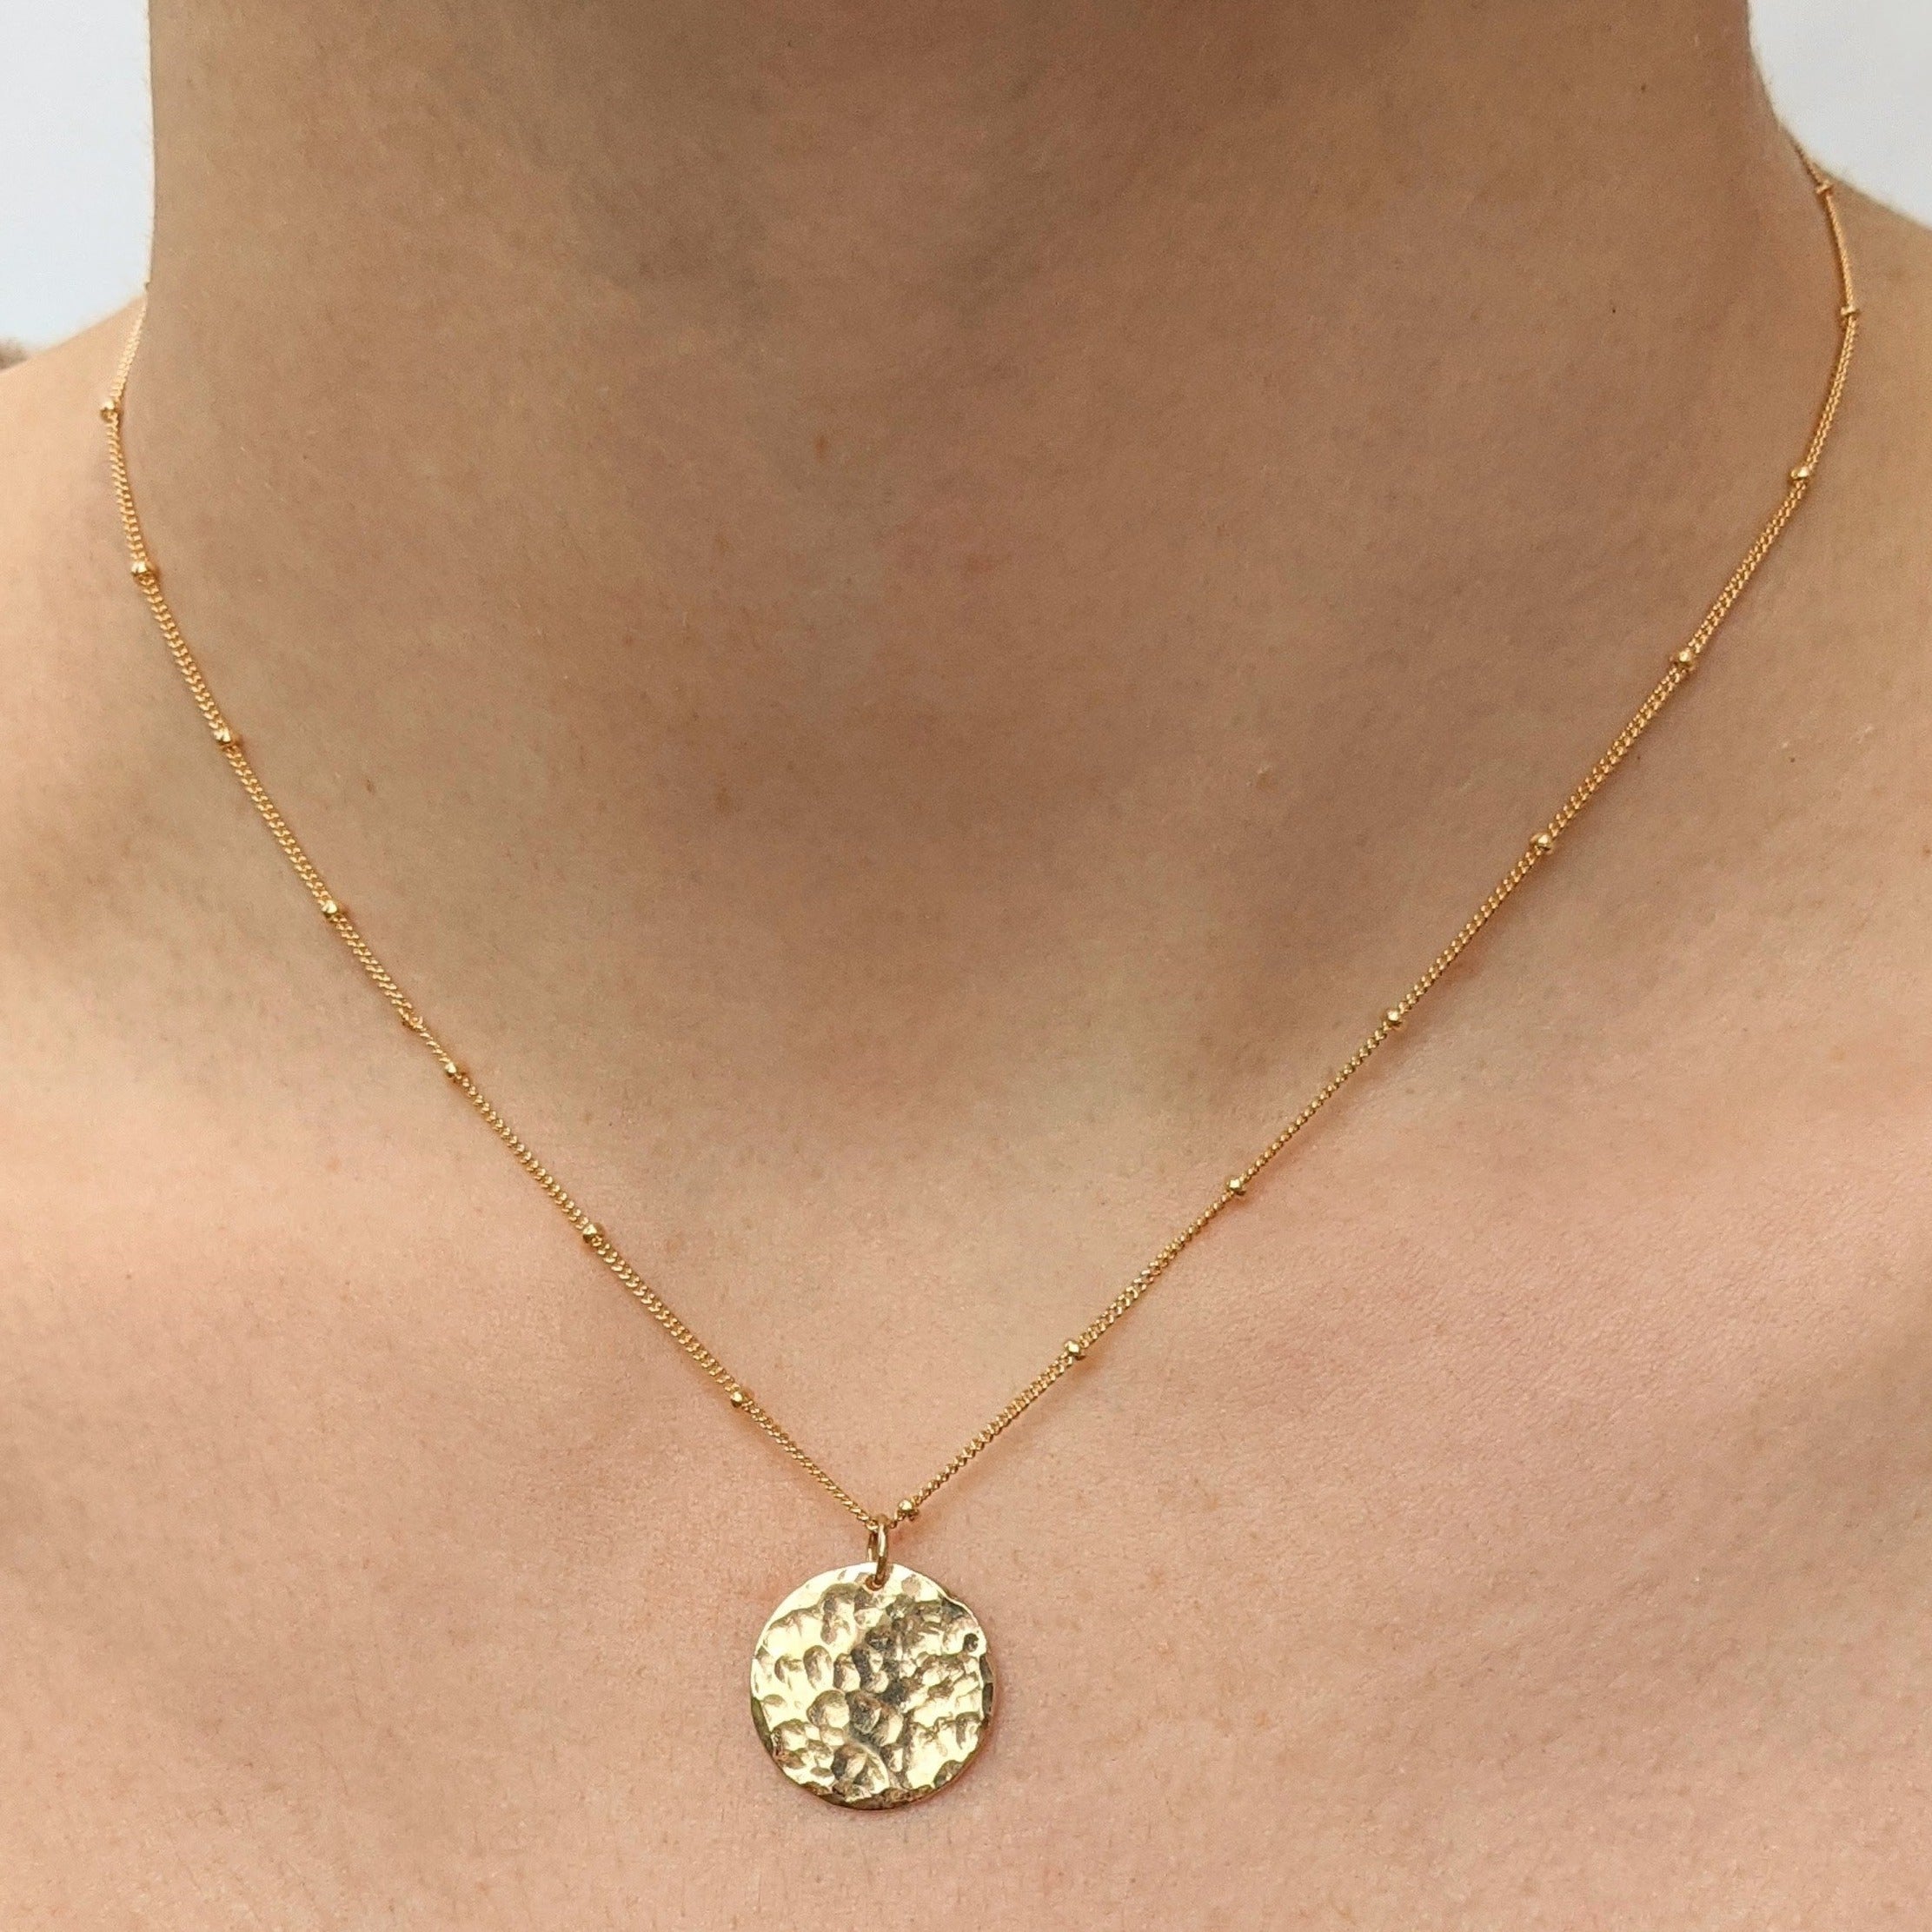 Small gold filled hammered disc pendant necklace 16 inch satellite chain